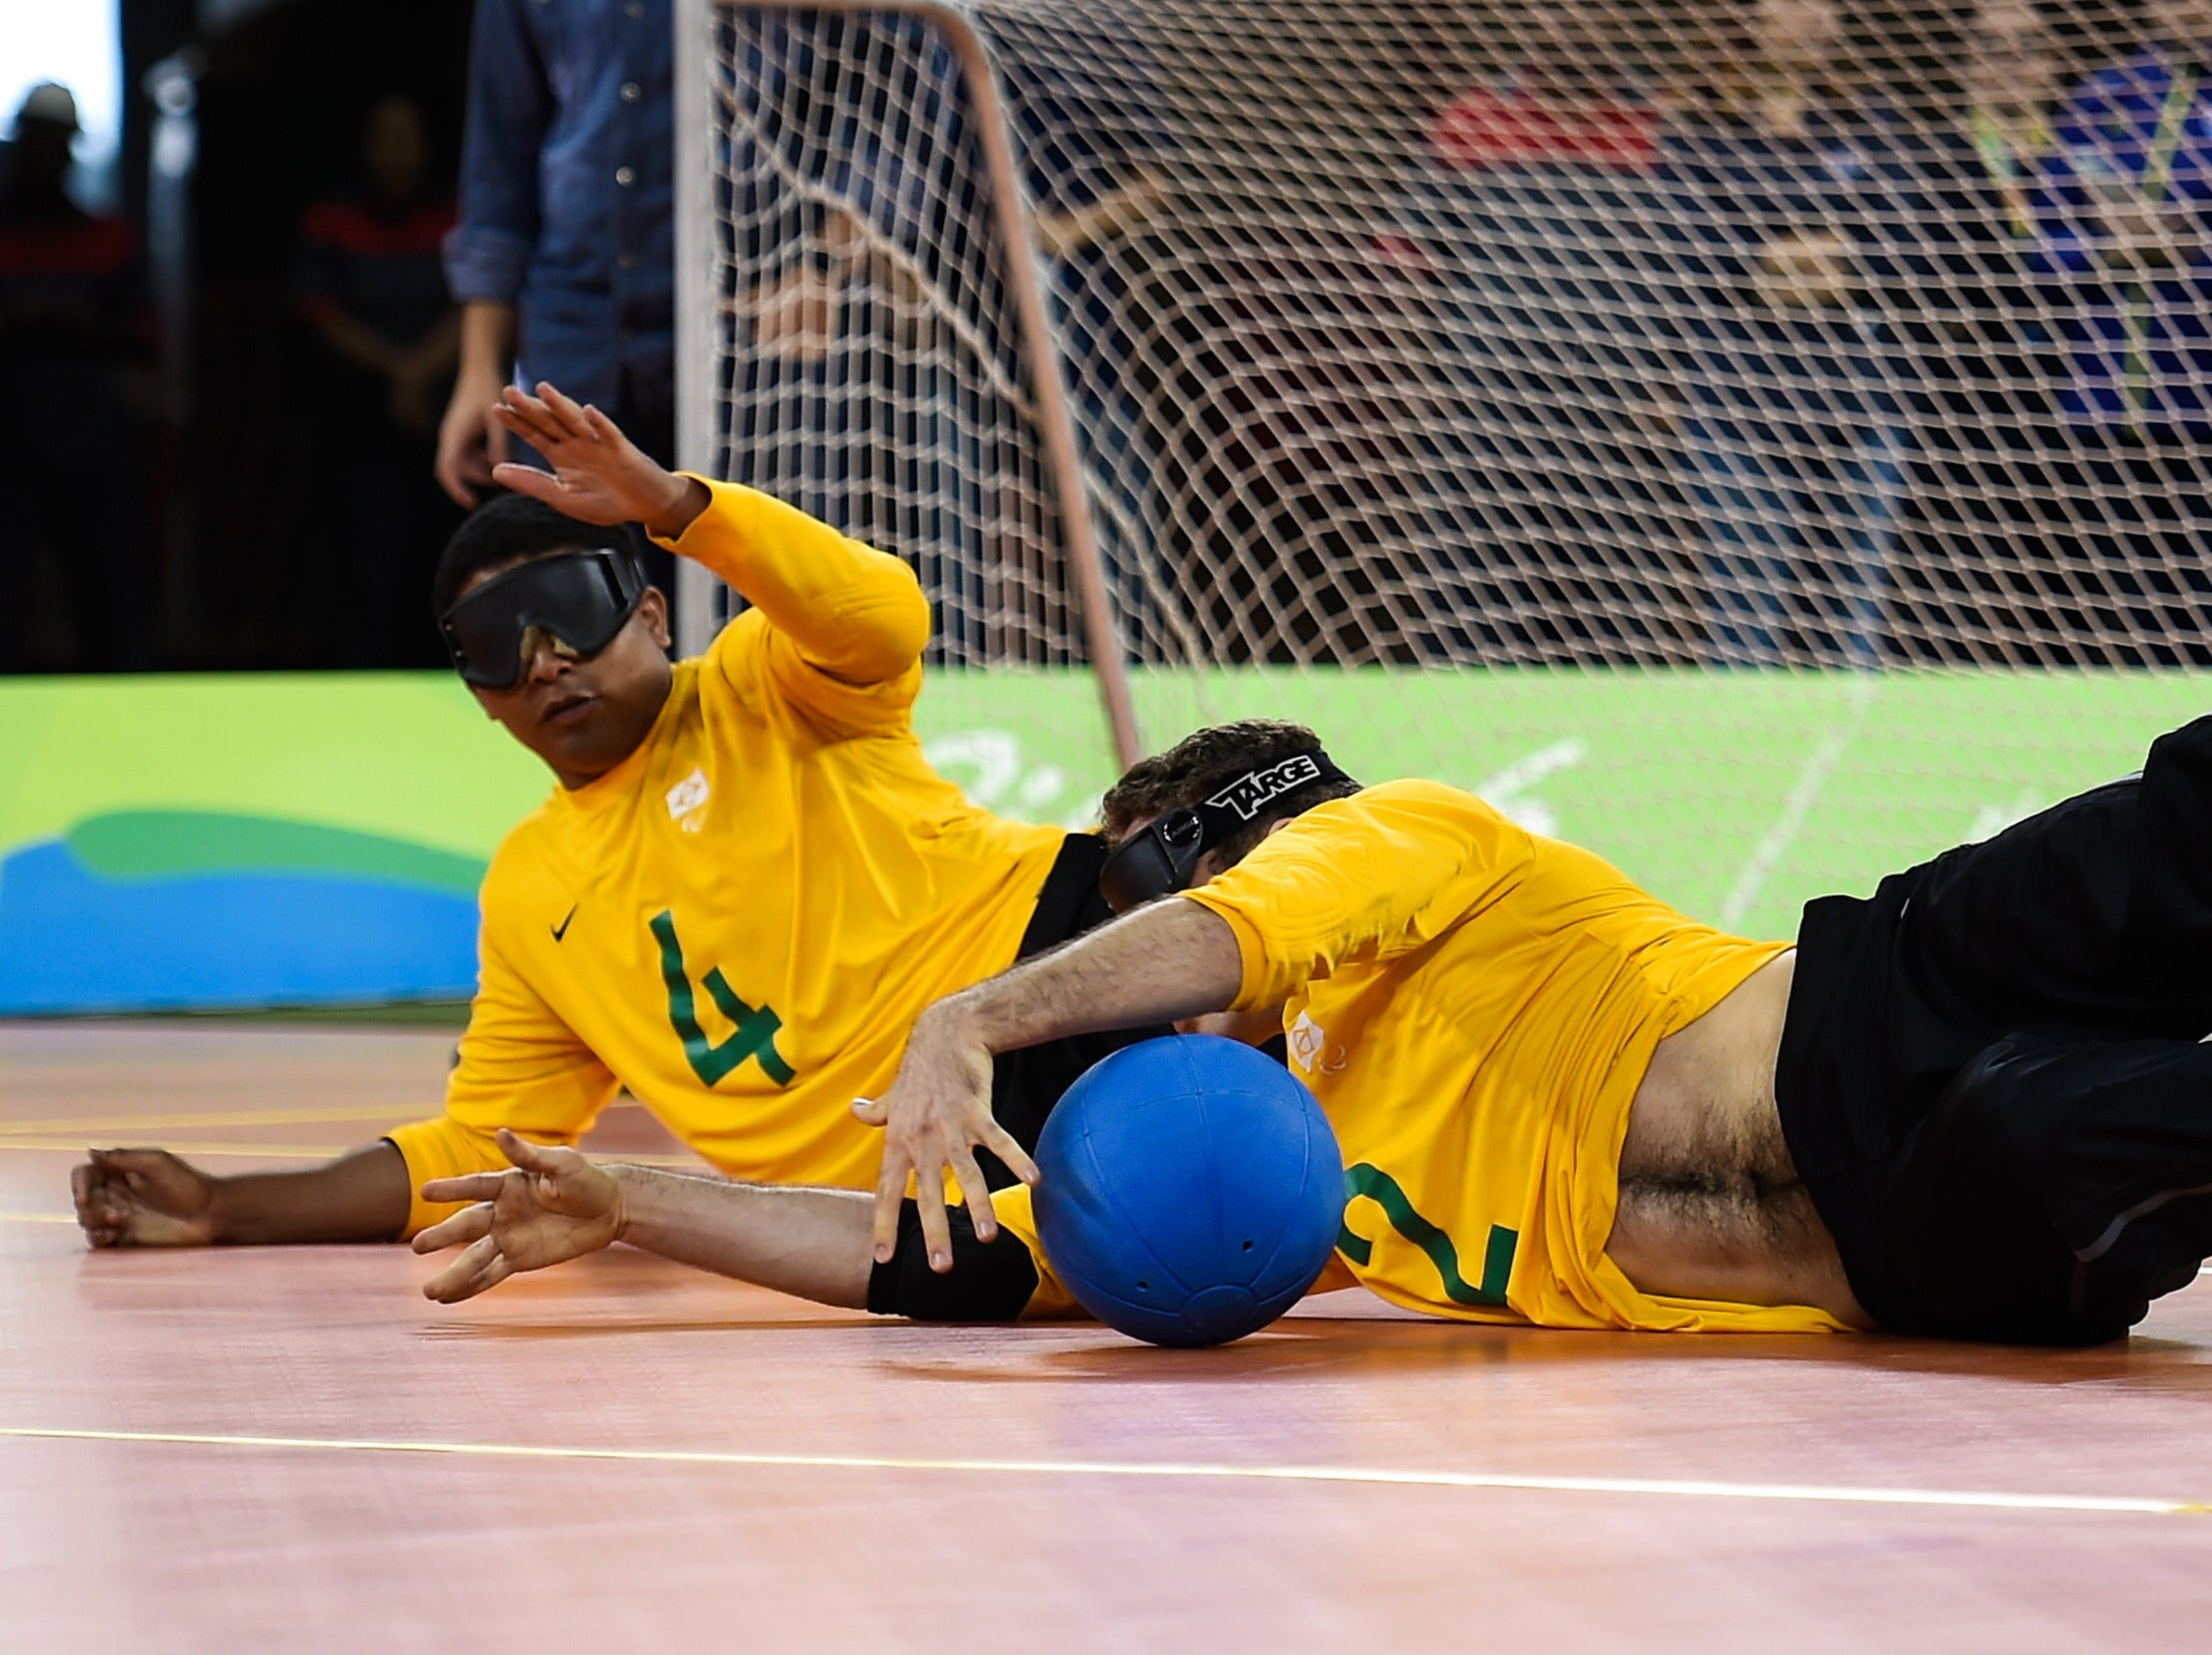 Athletes play a goalball exhibition match ahead of Rio 2016